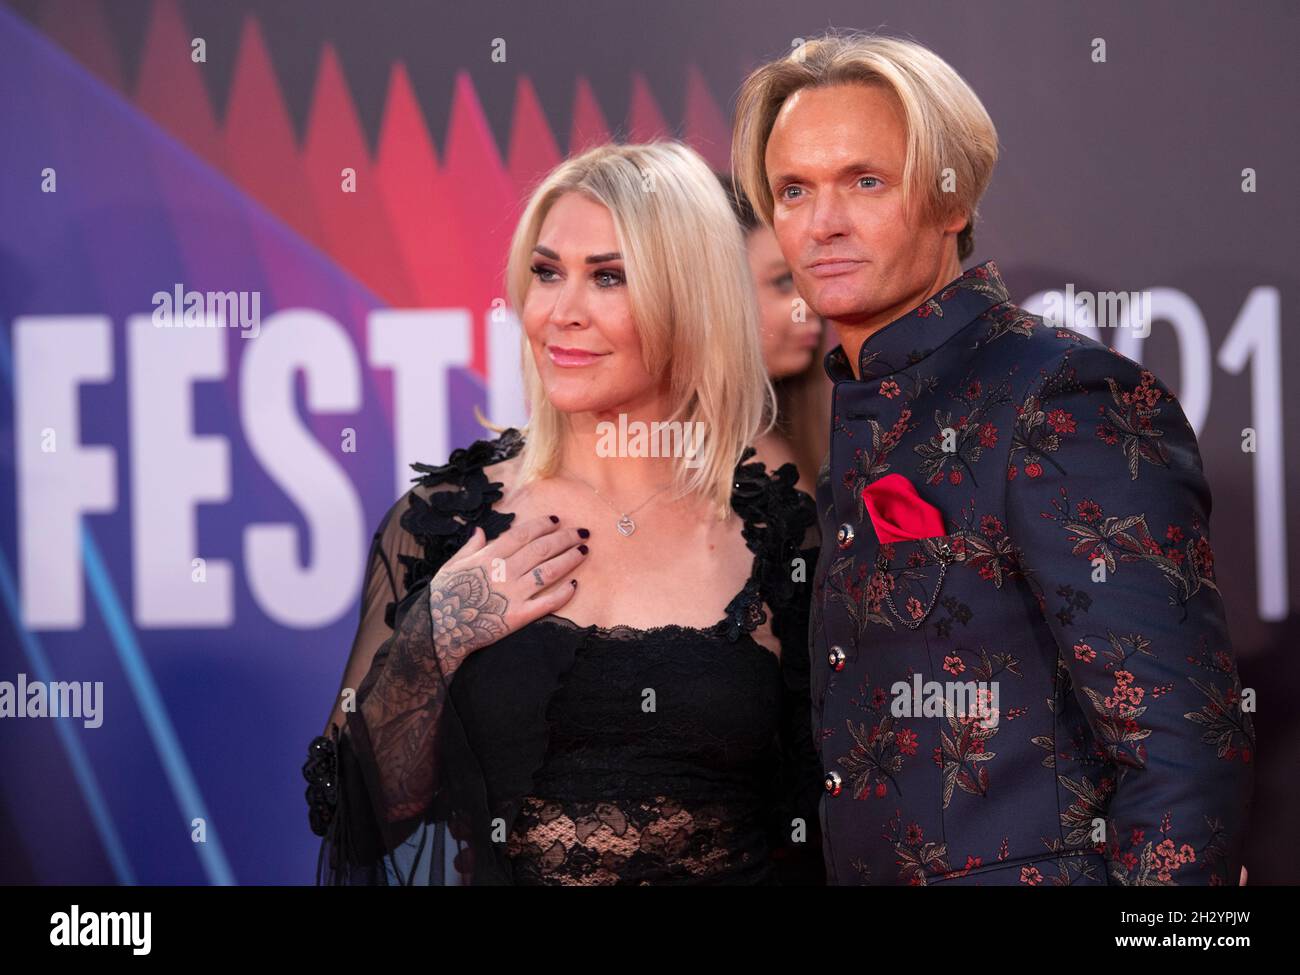 Jo O'Meara and guest attend the UK Premiere of 'King Richard' during the 65th BFI (British Film Institute) London Film Festival at The Royal Festival Hall. Stock Photo